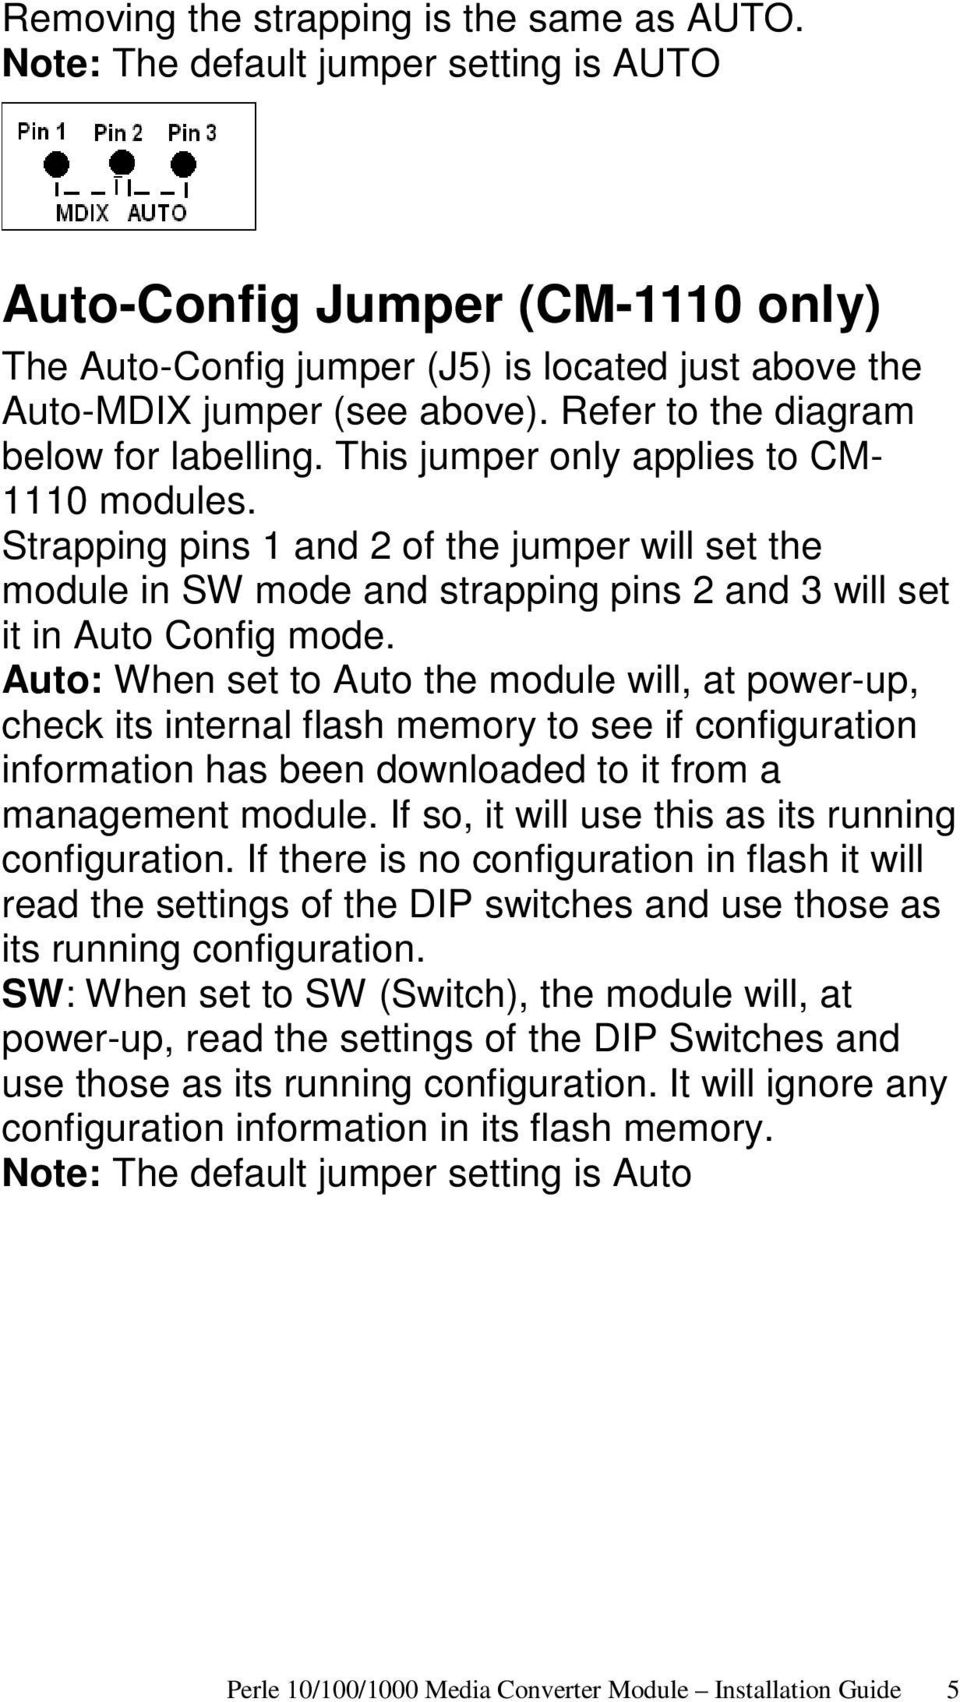 This jumper only applies to CM- 1110 modules. Strapping pins 1 and 2 of the jumper will set the module in SW mode and strapping pins 2 and 3 will set it in Auto Config mode.